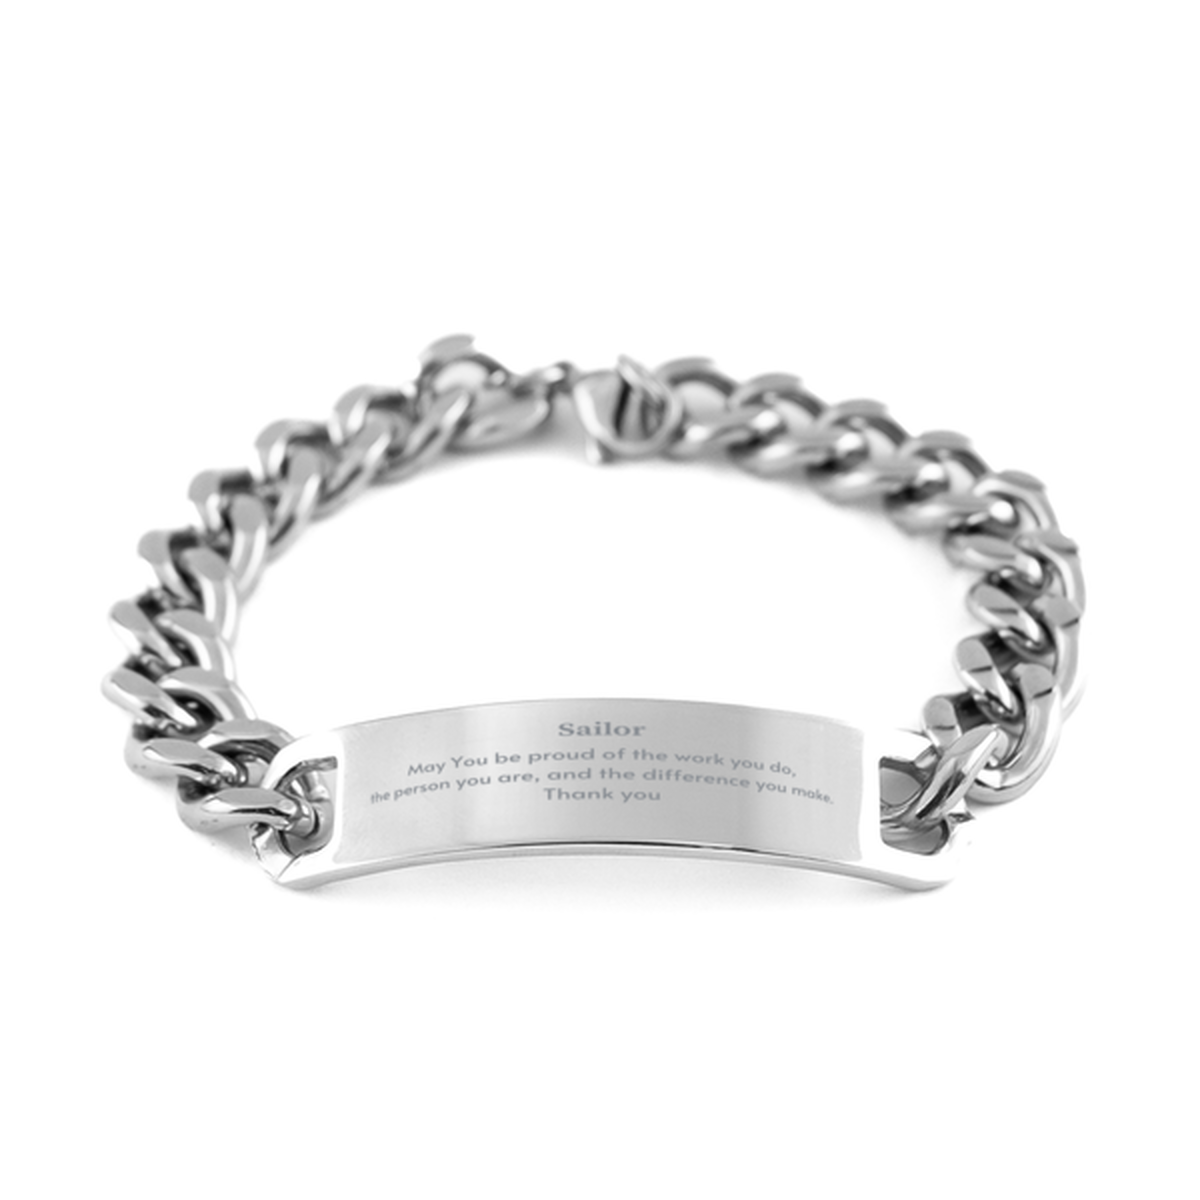 Heartwarming Cuban Chain Stainless Steel Bracelet Retirement Coworkers Gifts for Sailor, Sailor May You be proud of the work you do, the person you are Gifts for Boss Men Women Friends